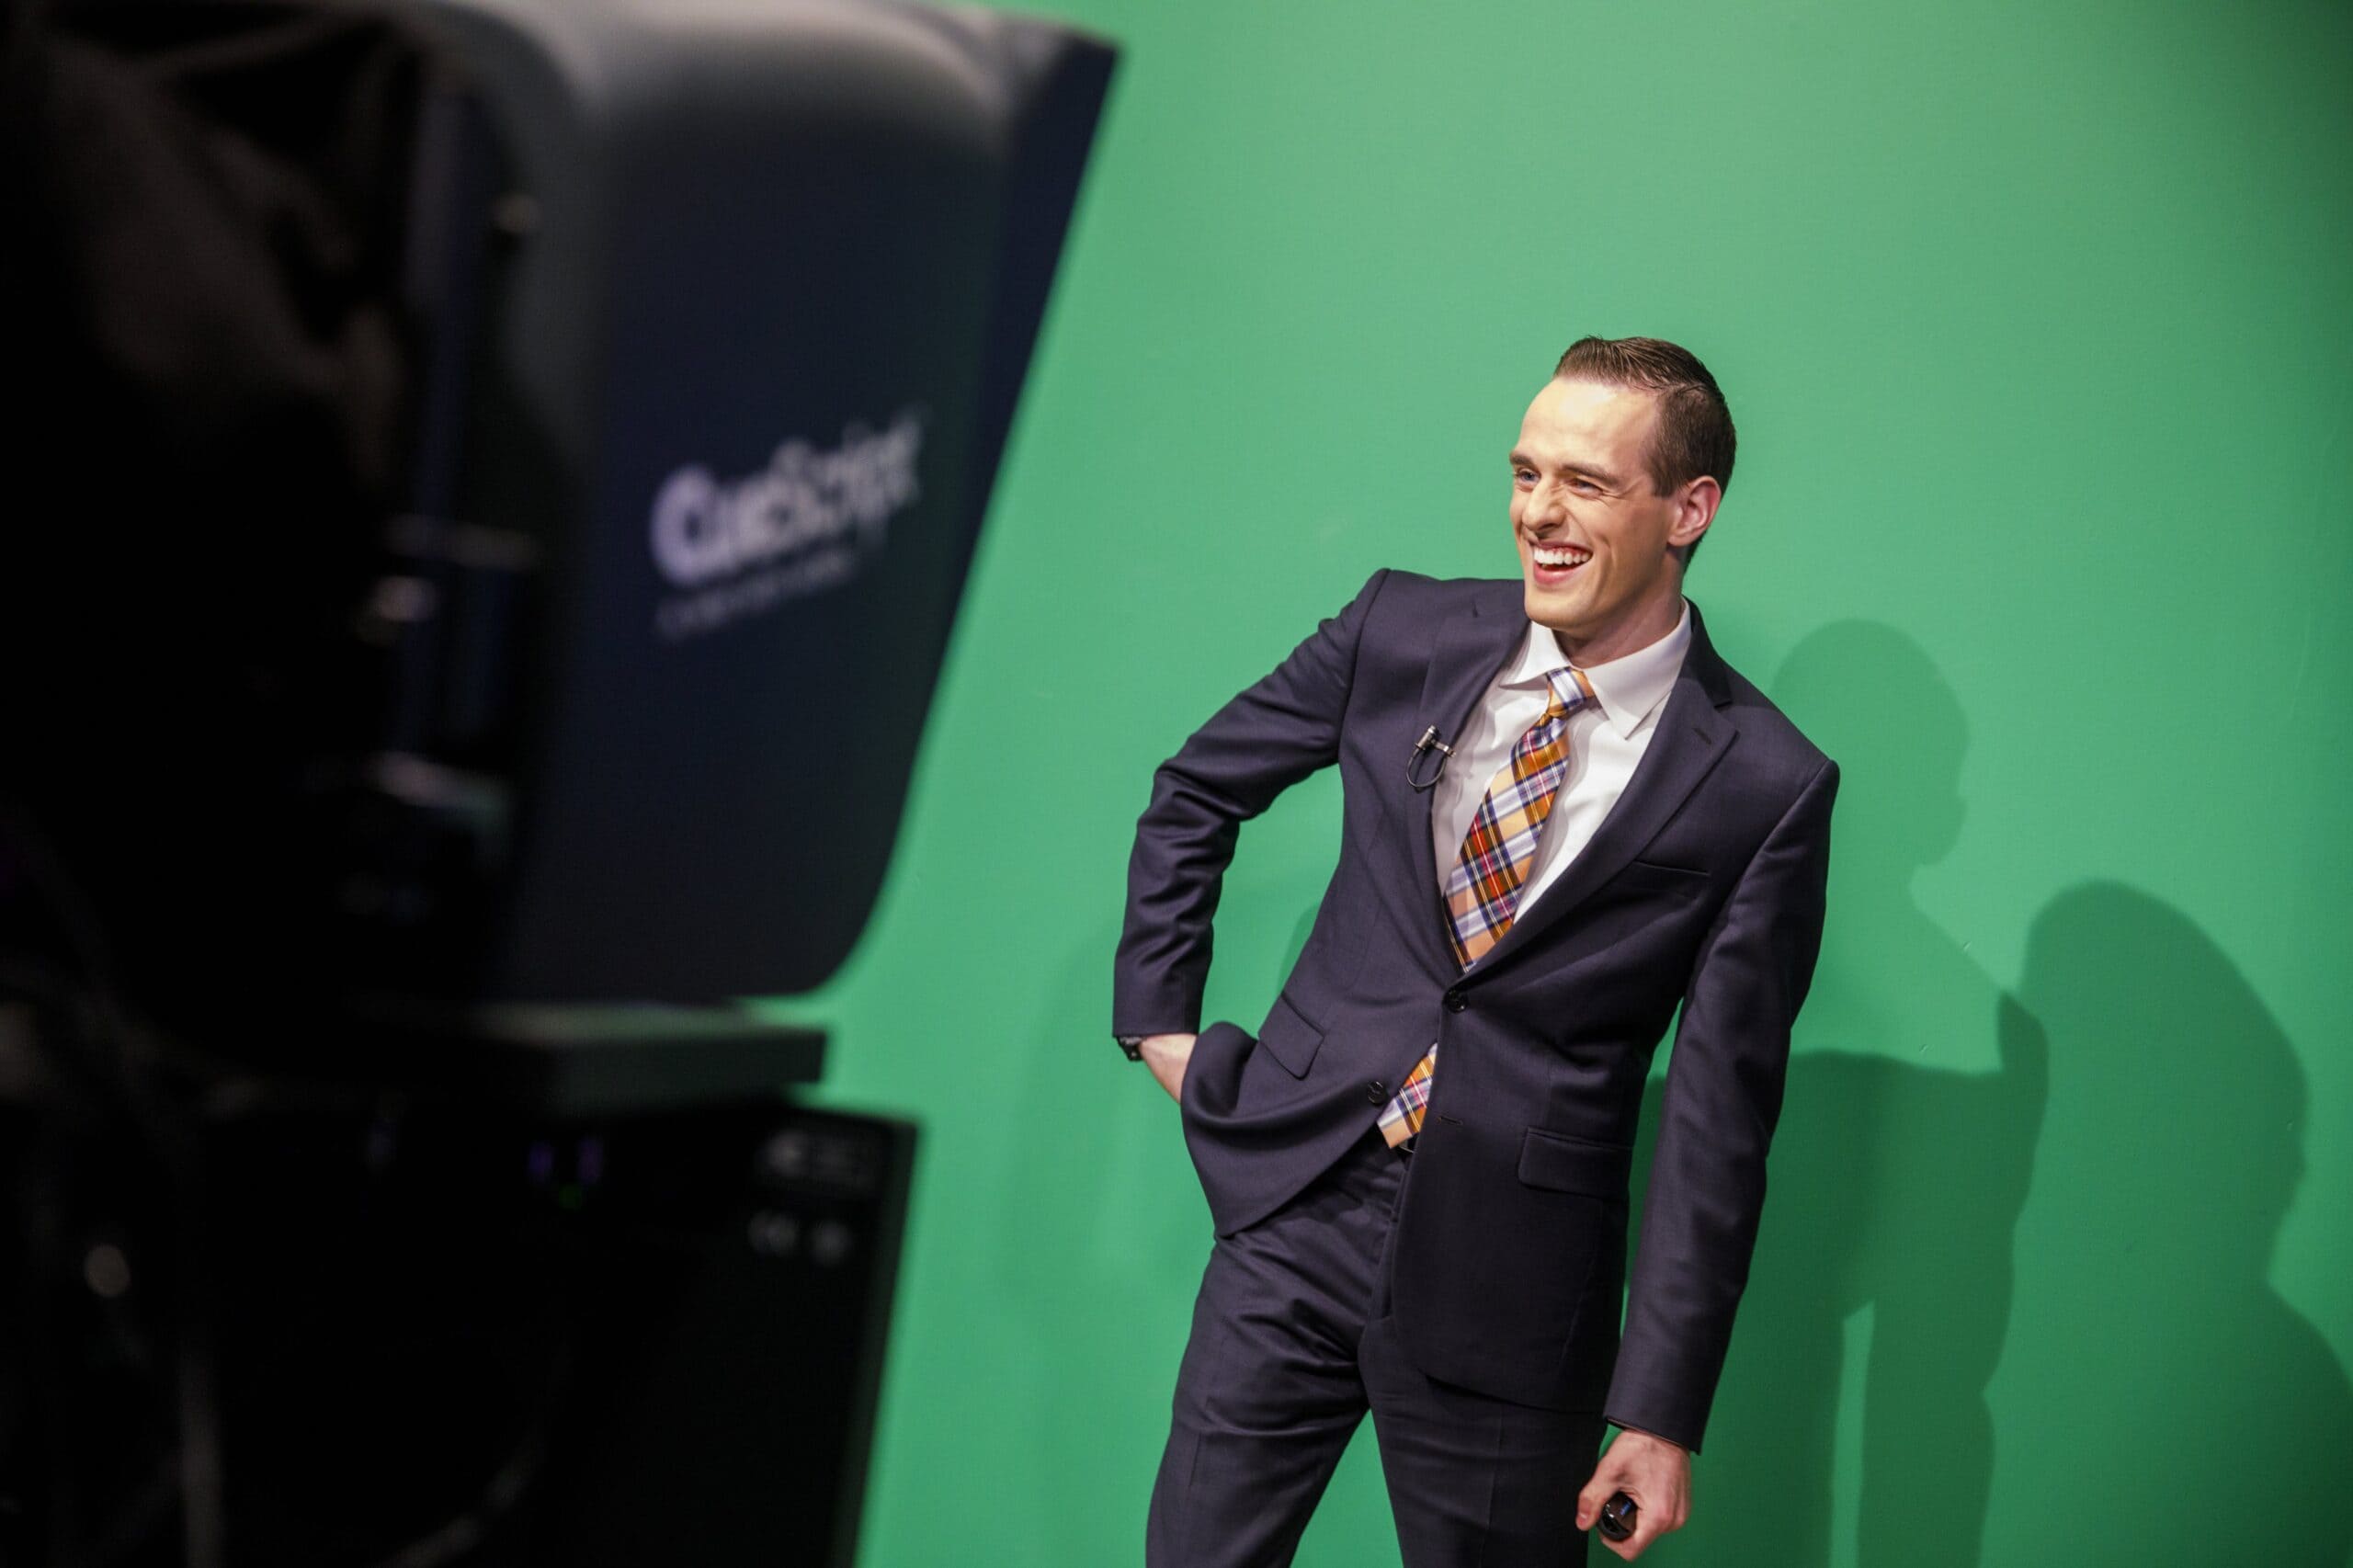 a man in a suit standing in front of a green screen.